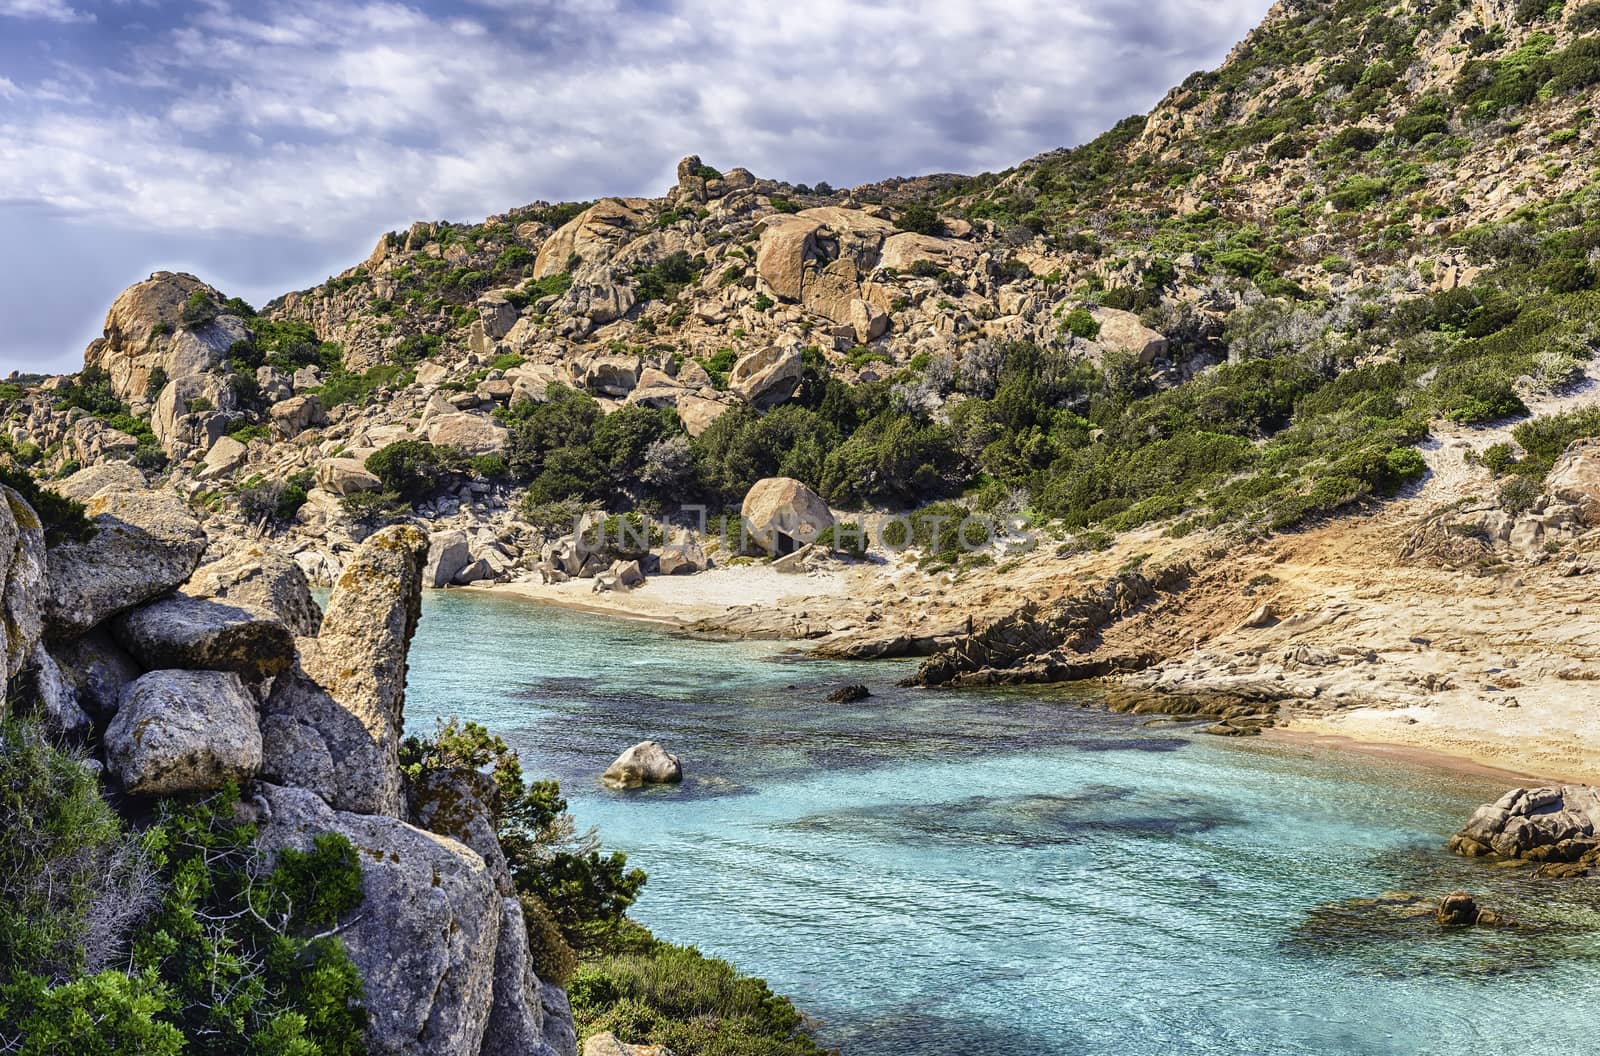 Scenic view over the picturesque Cala Corsara in the island of Spargi, one of the highlights of the Maddalena Archipelago, Sardinia, Italy